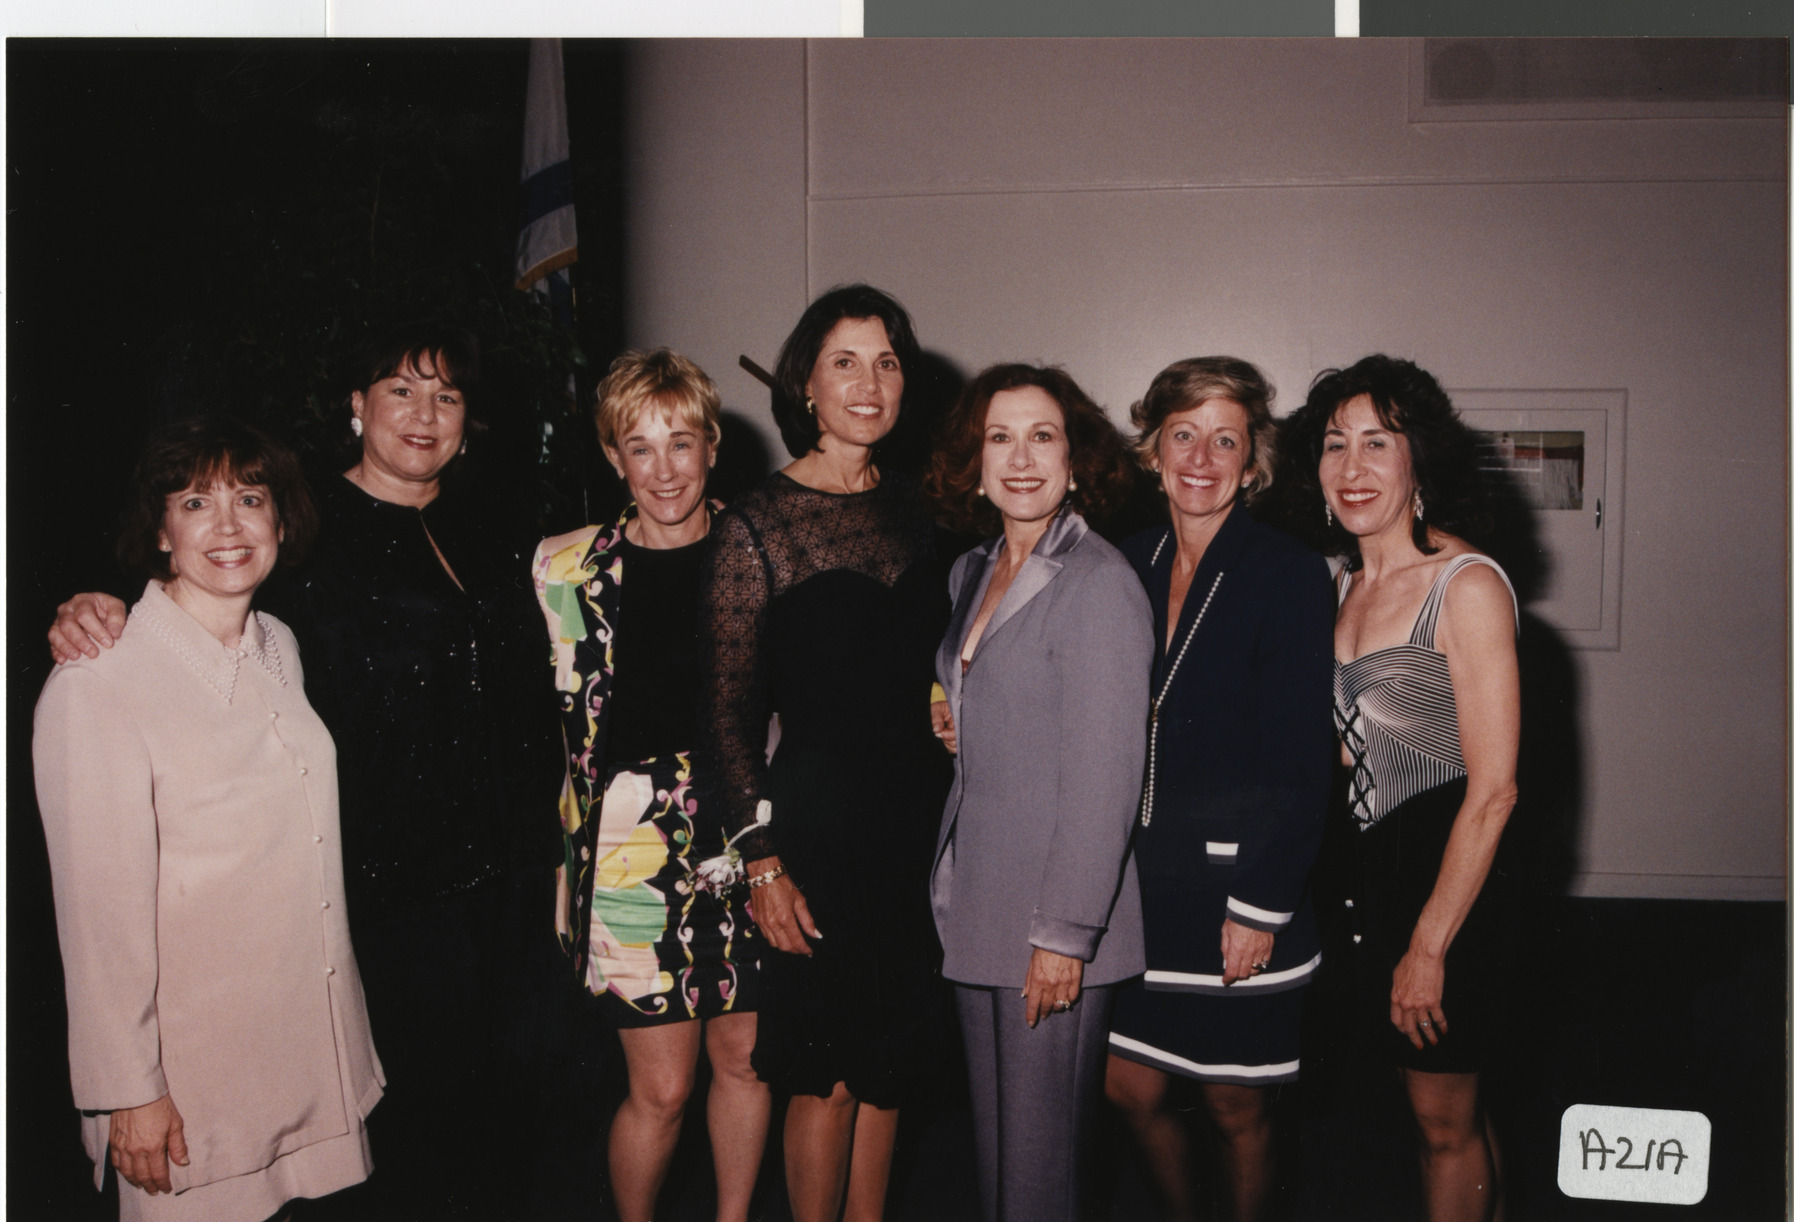 Photograph of group with Sandy Mallin, June 8, 1997